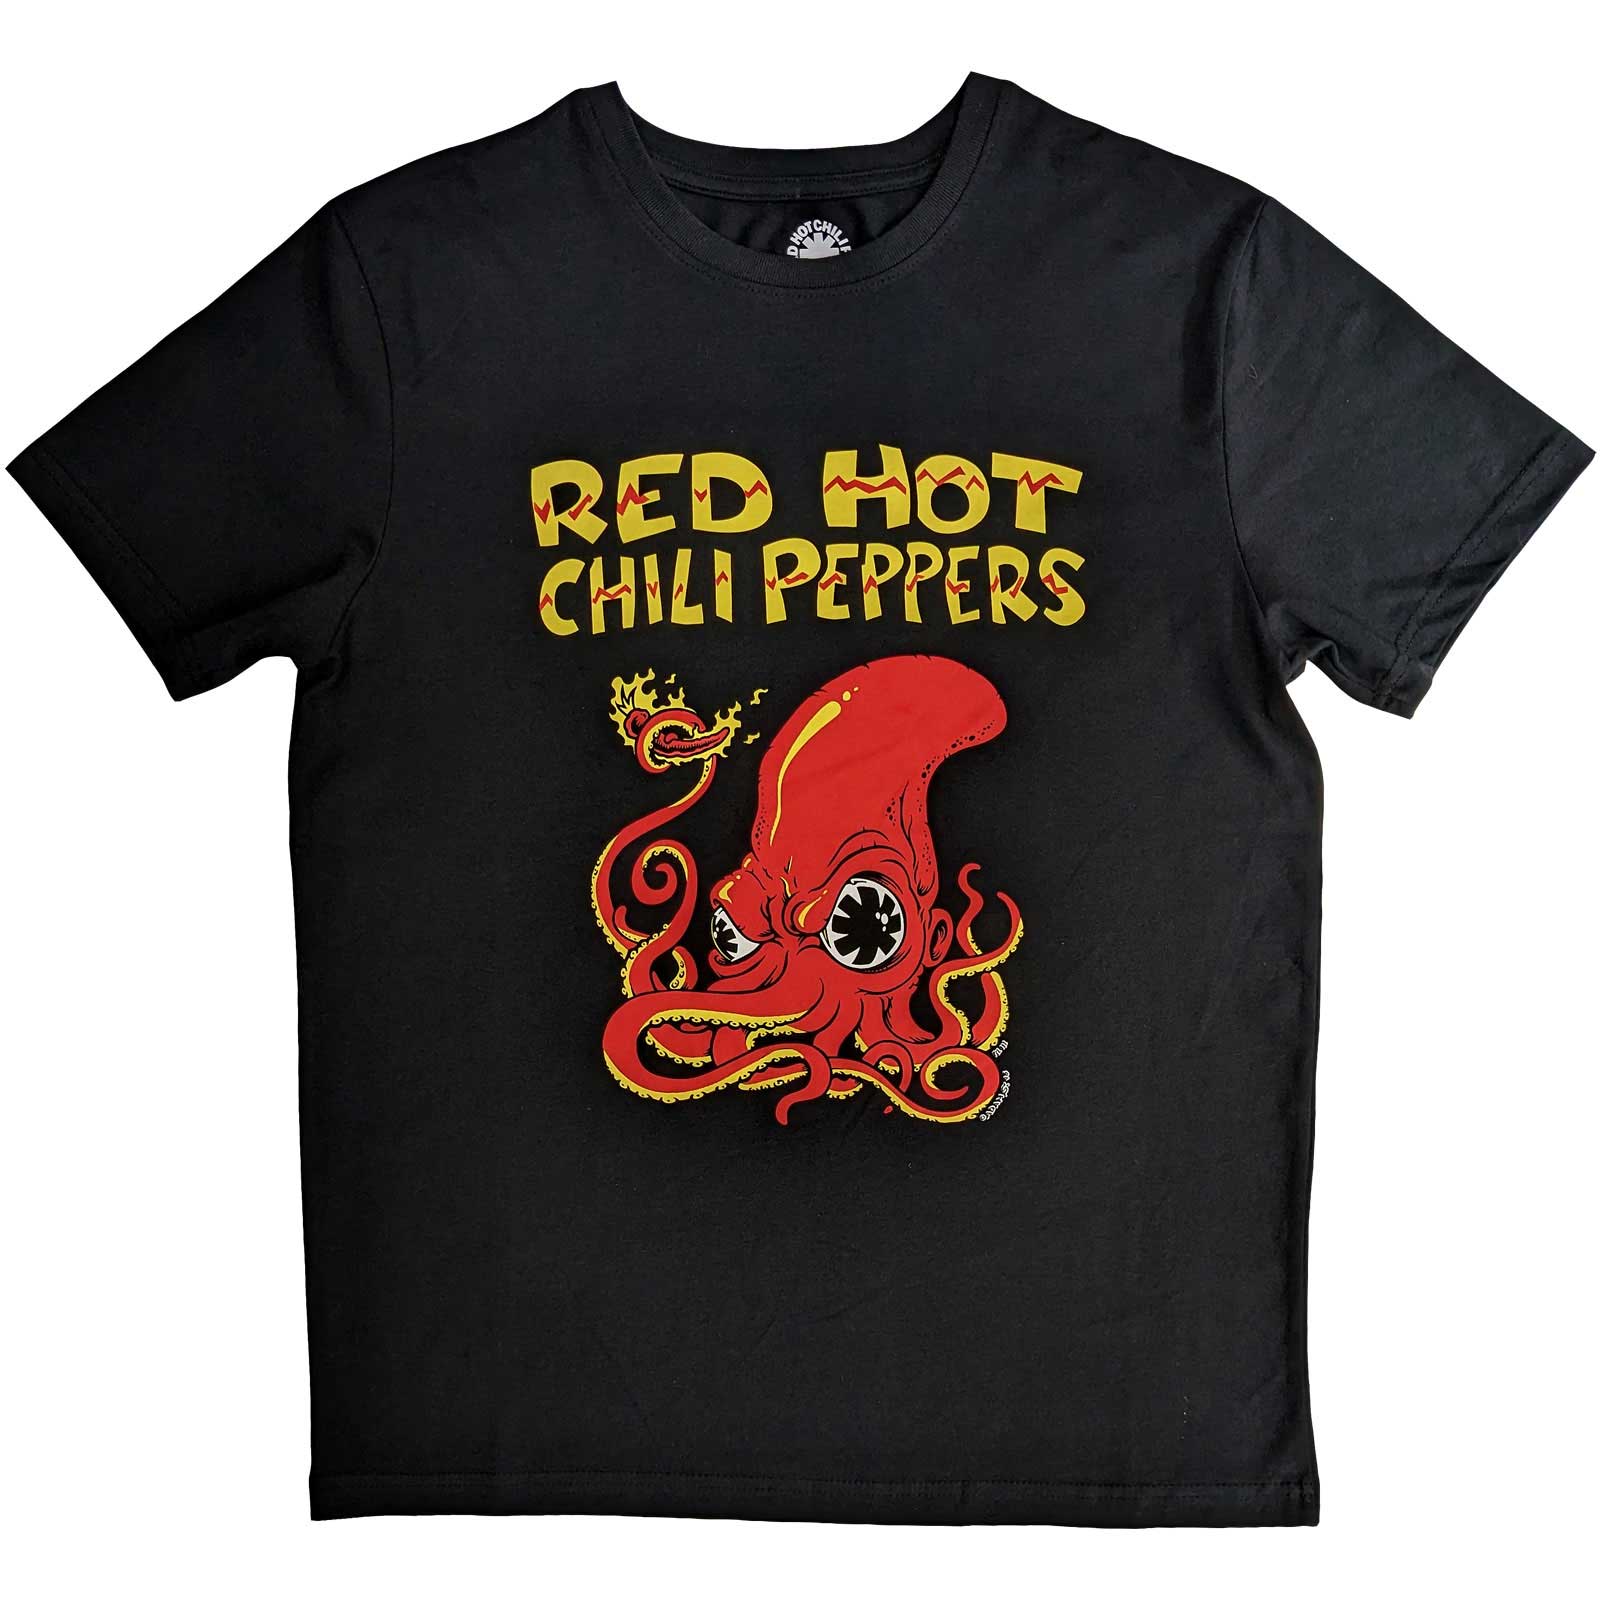 Red Hot Chili Peppers T-Shirt - Octopus (Unisex)